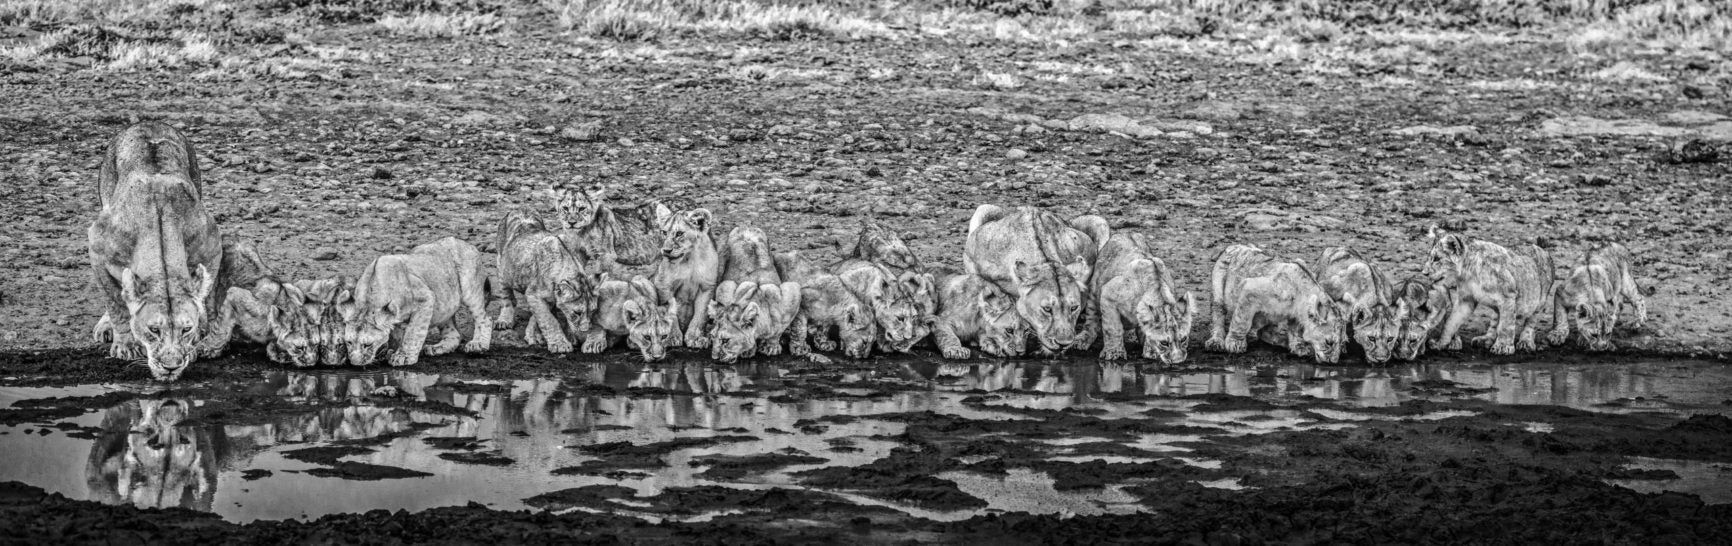  One for the Road David Yarrow